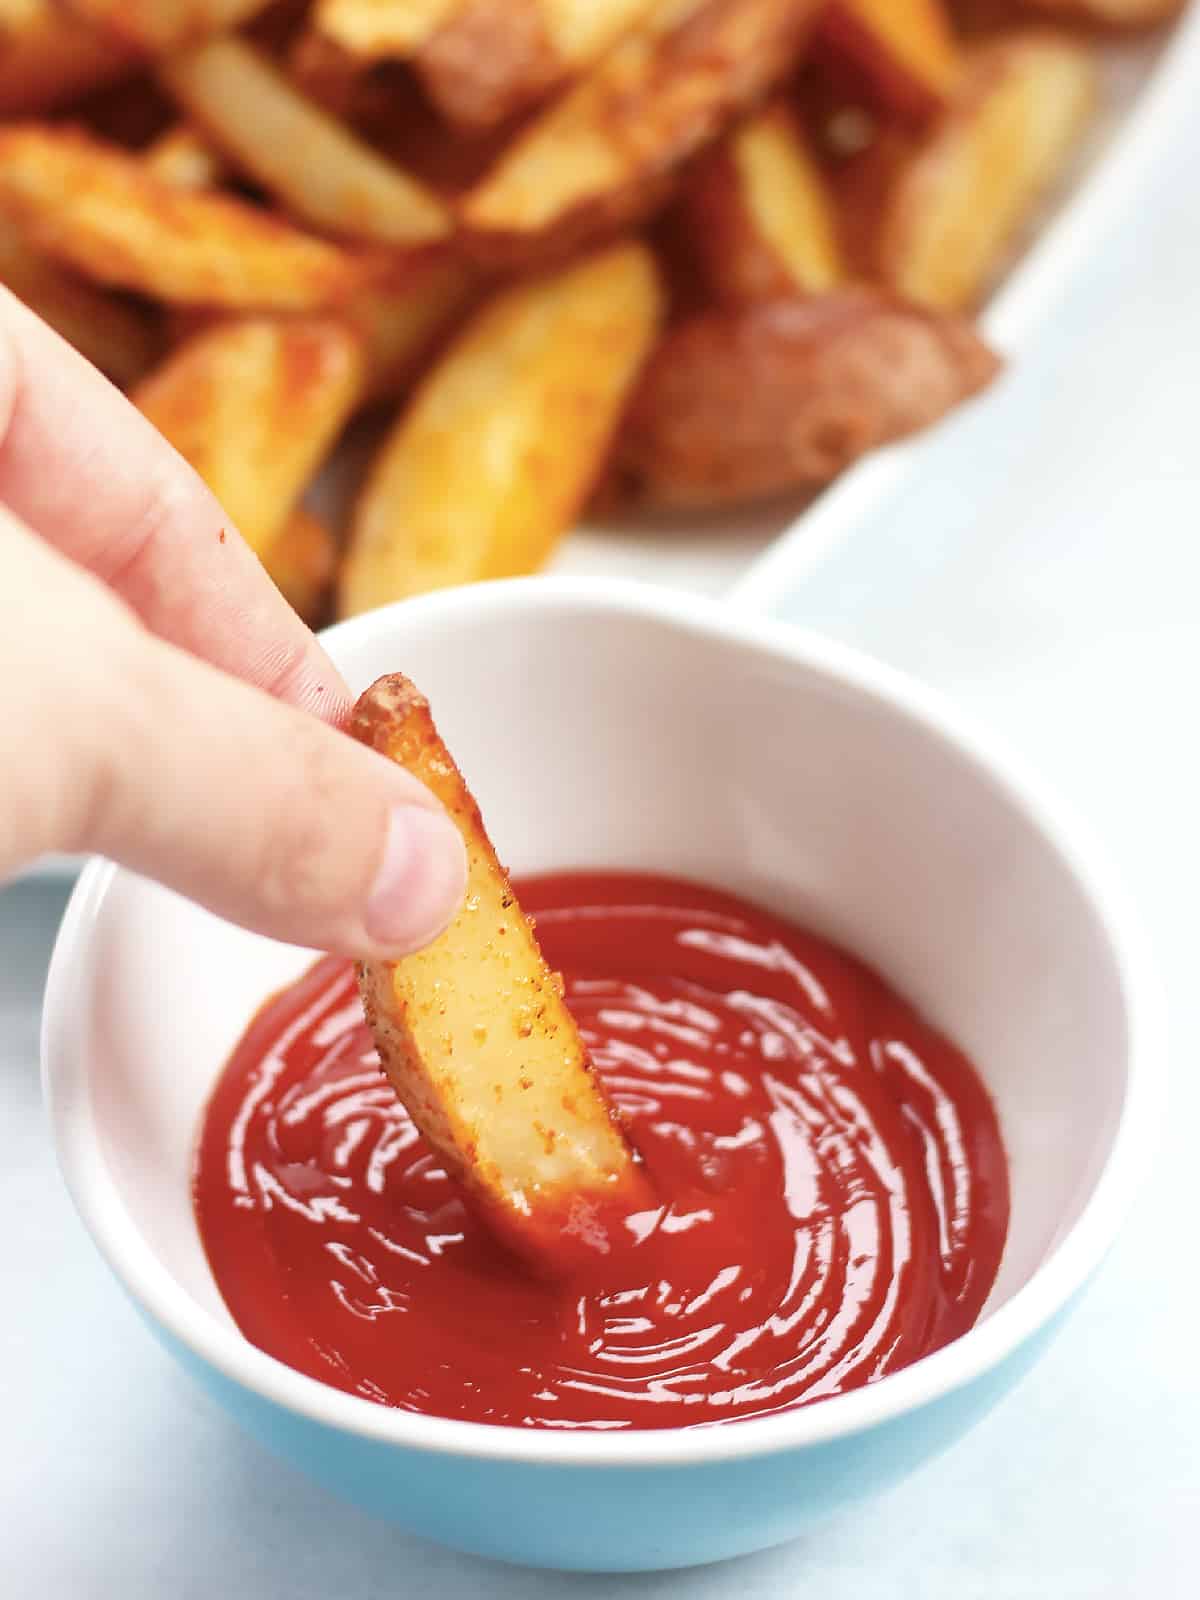 A fry being dipped into ketchup.